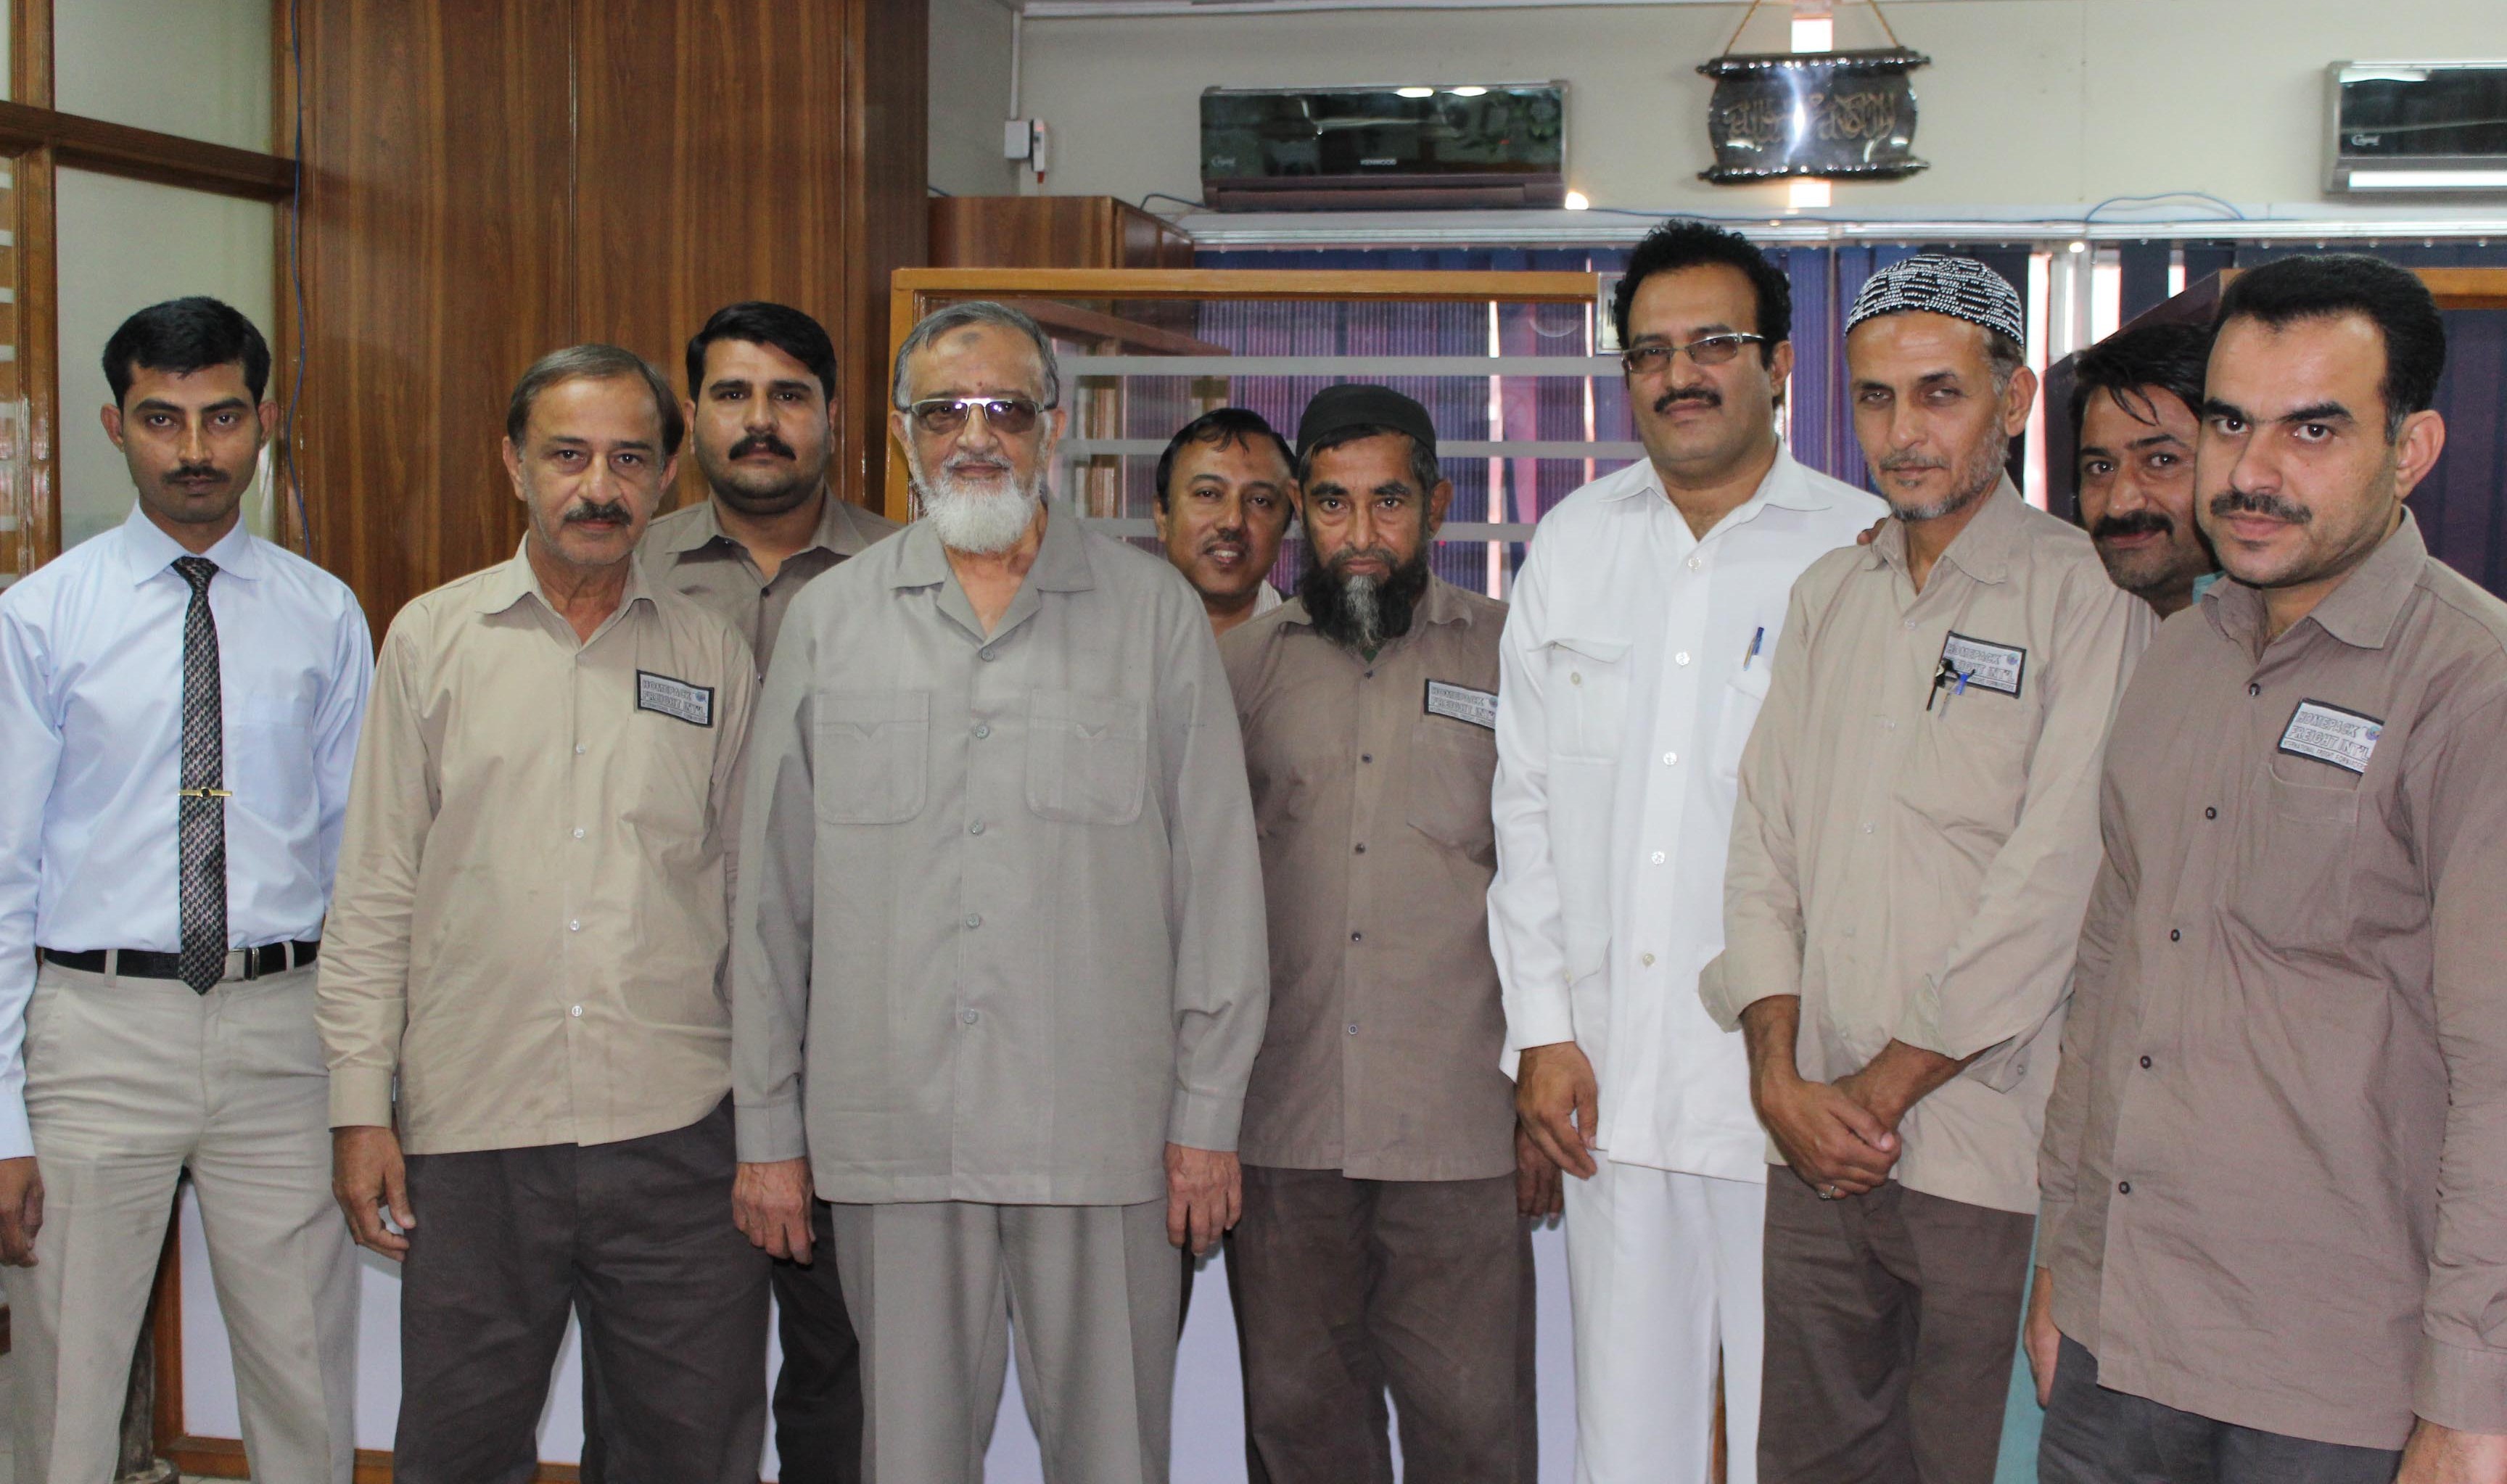 ALL WAREHOUSE STAFF & PACKERS WITH PRESIDENT A. HASHIM